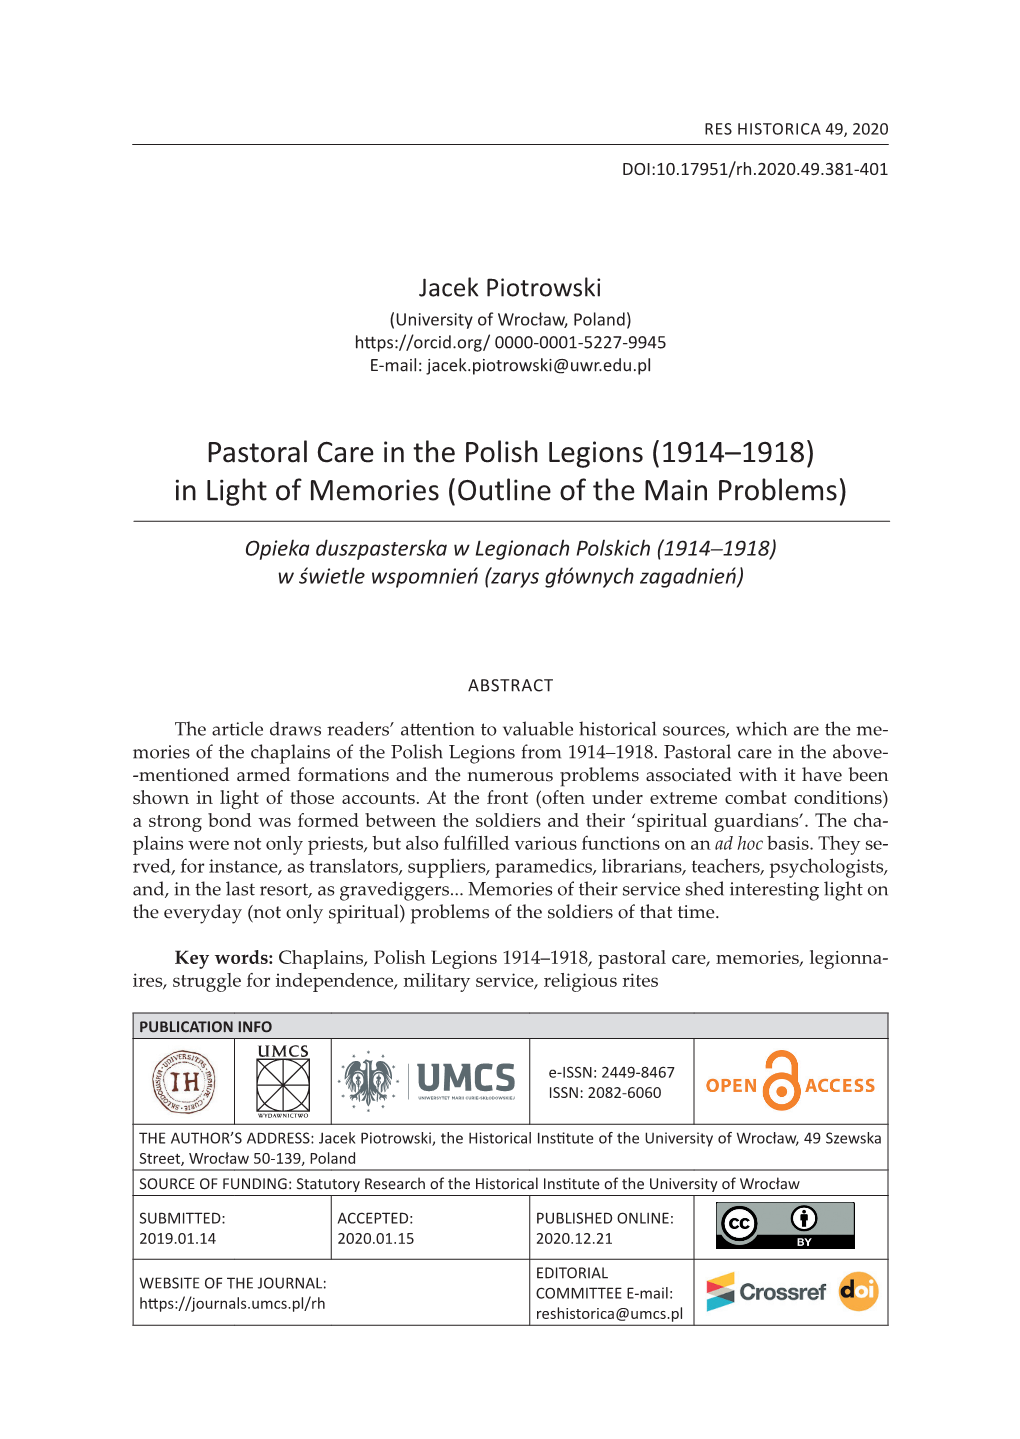 Pastoral Care in the Polish Legions (1914–1918) in Light of Memories (Outline of the Main Problems)